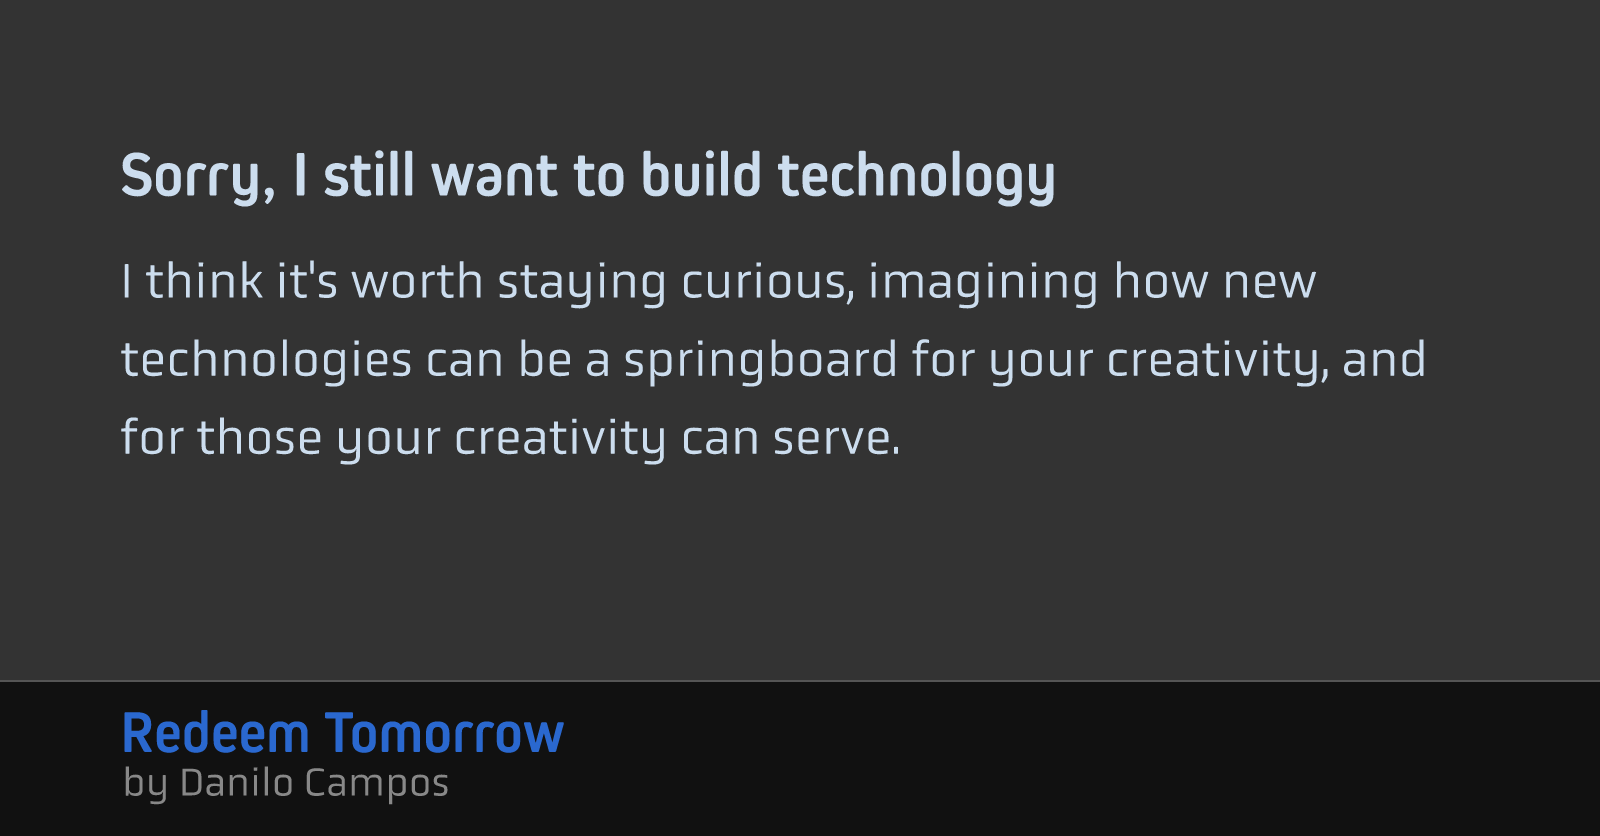 Sorry, I still want to build technology